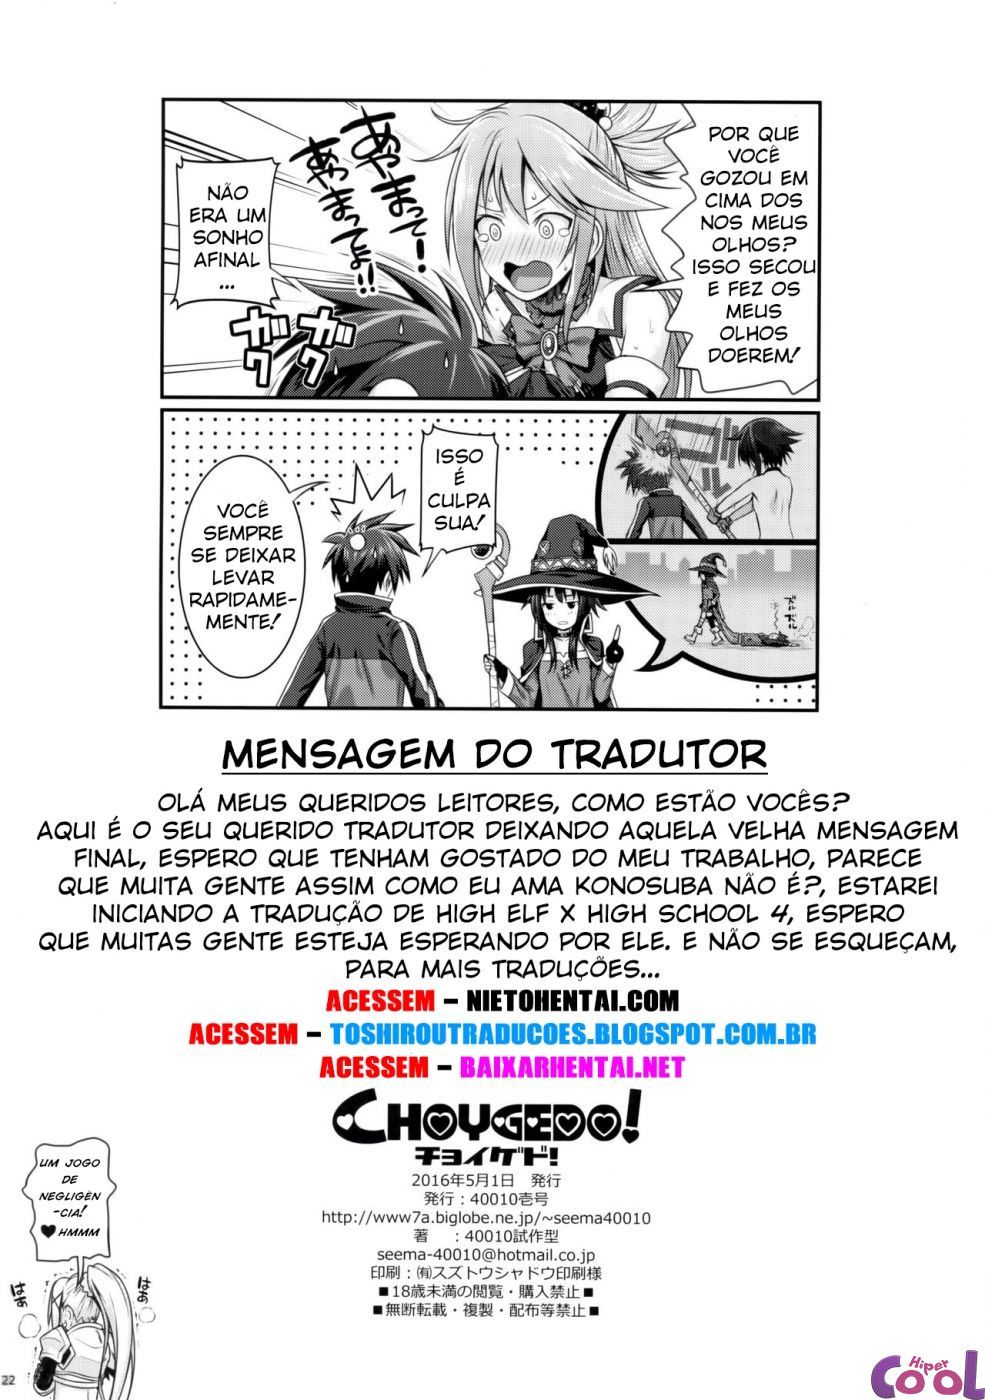 choygedo-chapter-01-page-22.jpg